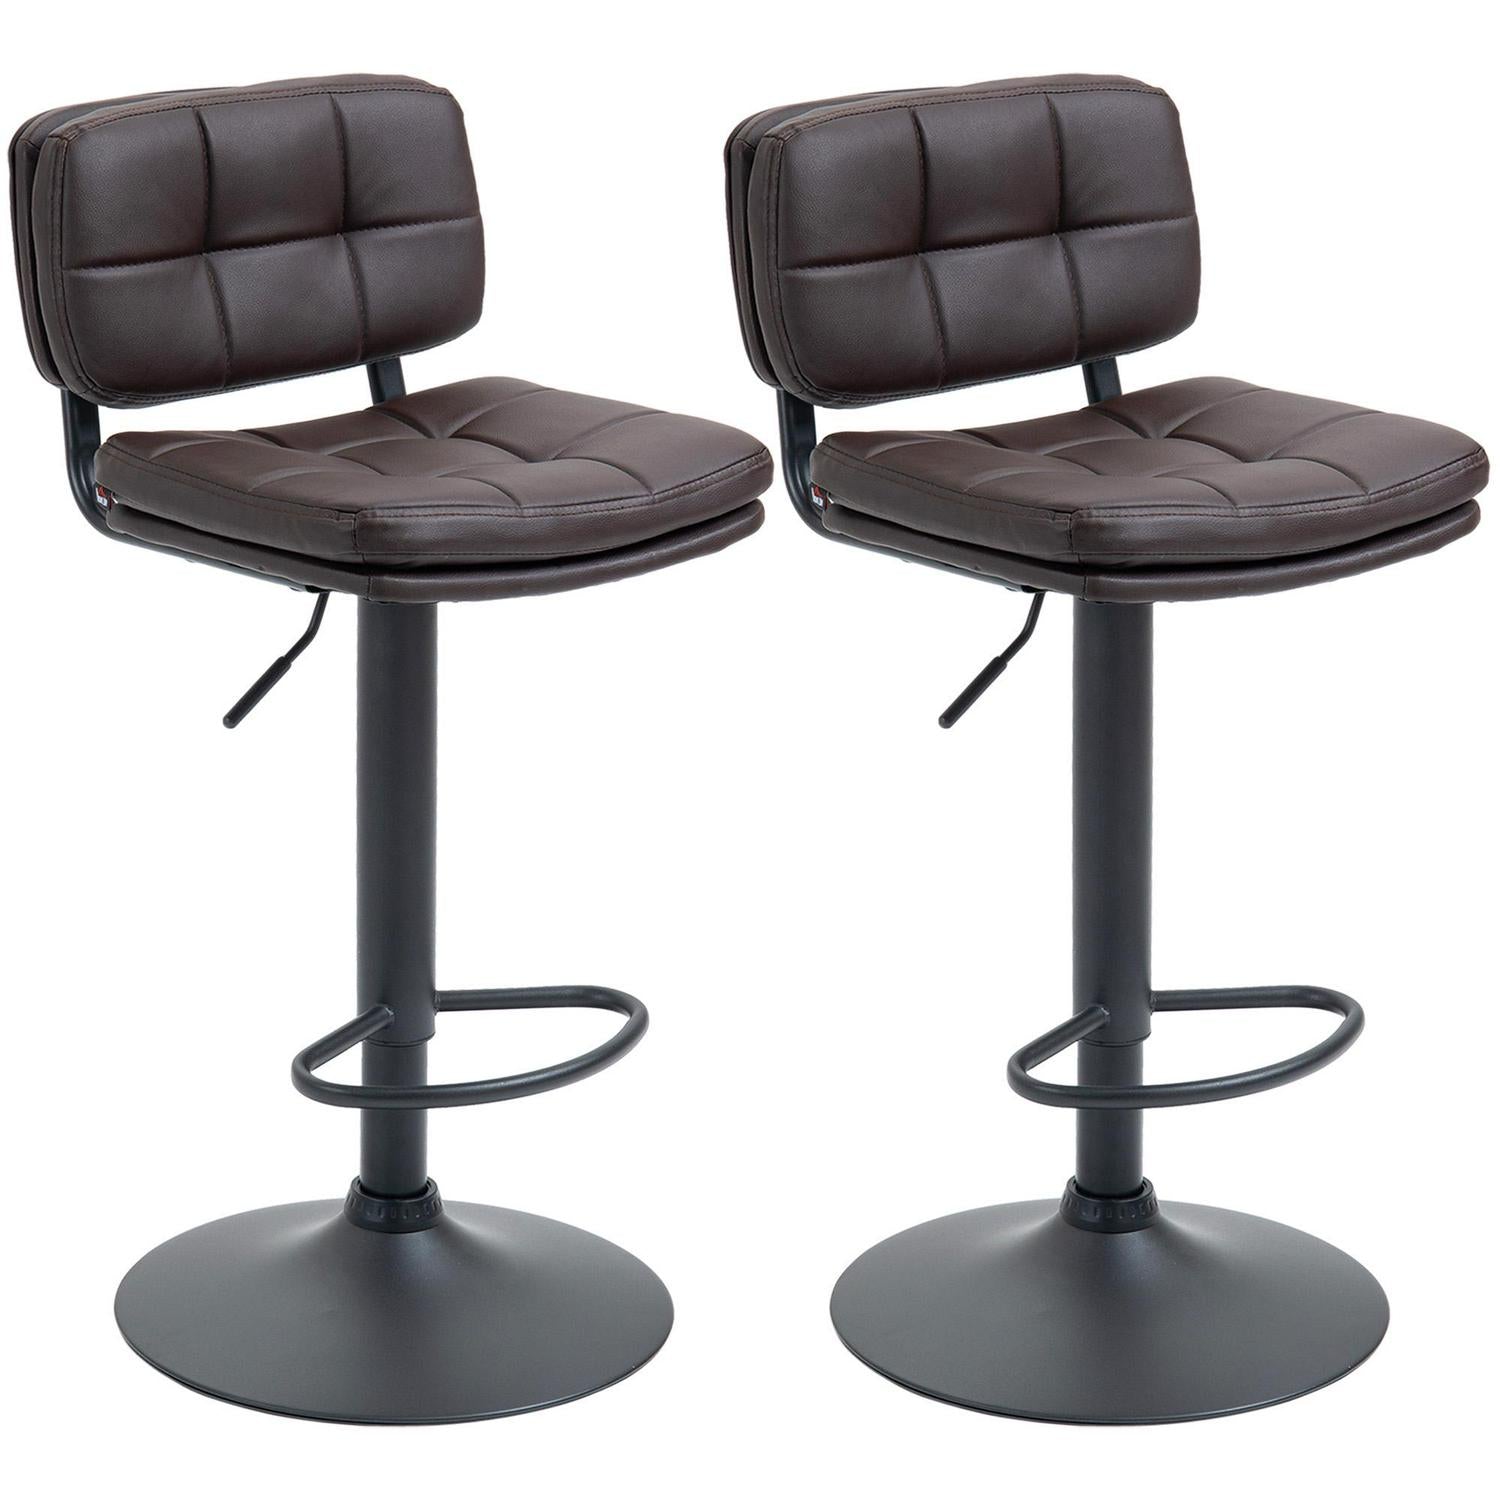 Set Of 2 Swivel Breakfast Bar Stools With Back - Brown